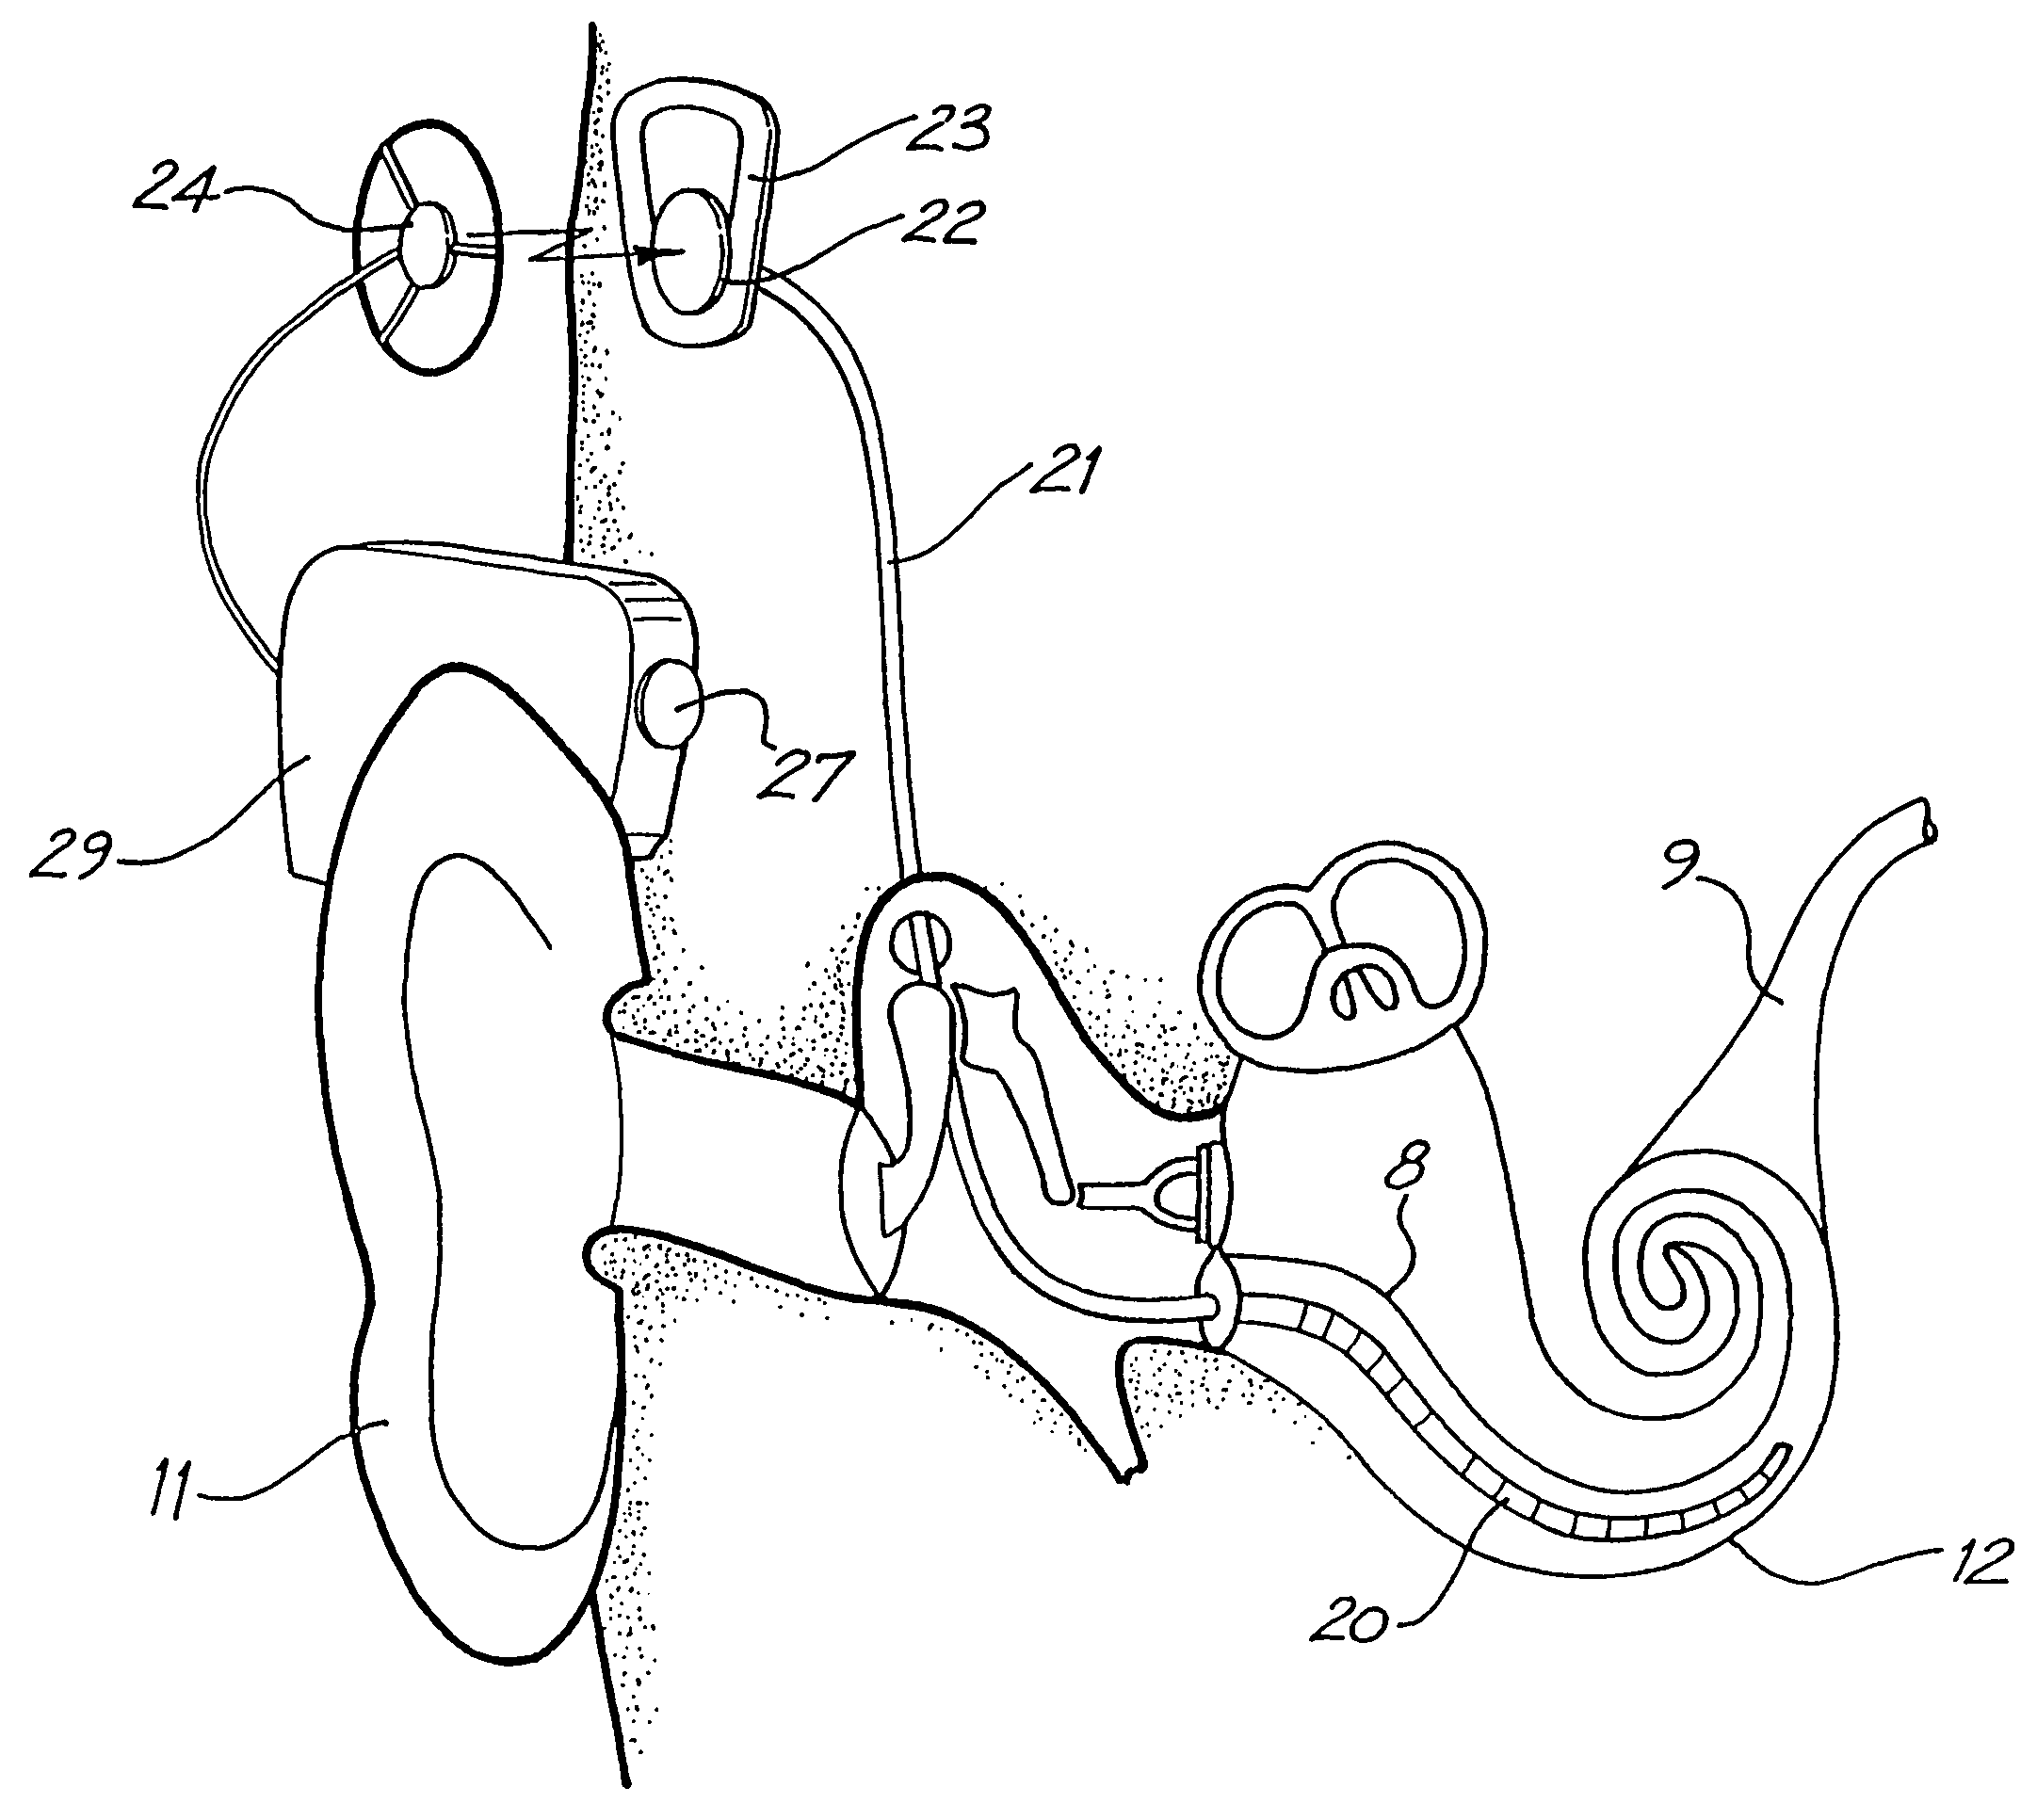 Variable sensitivity control for a cochlear implant